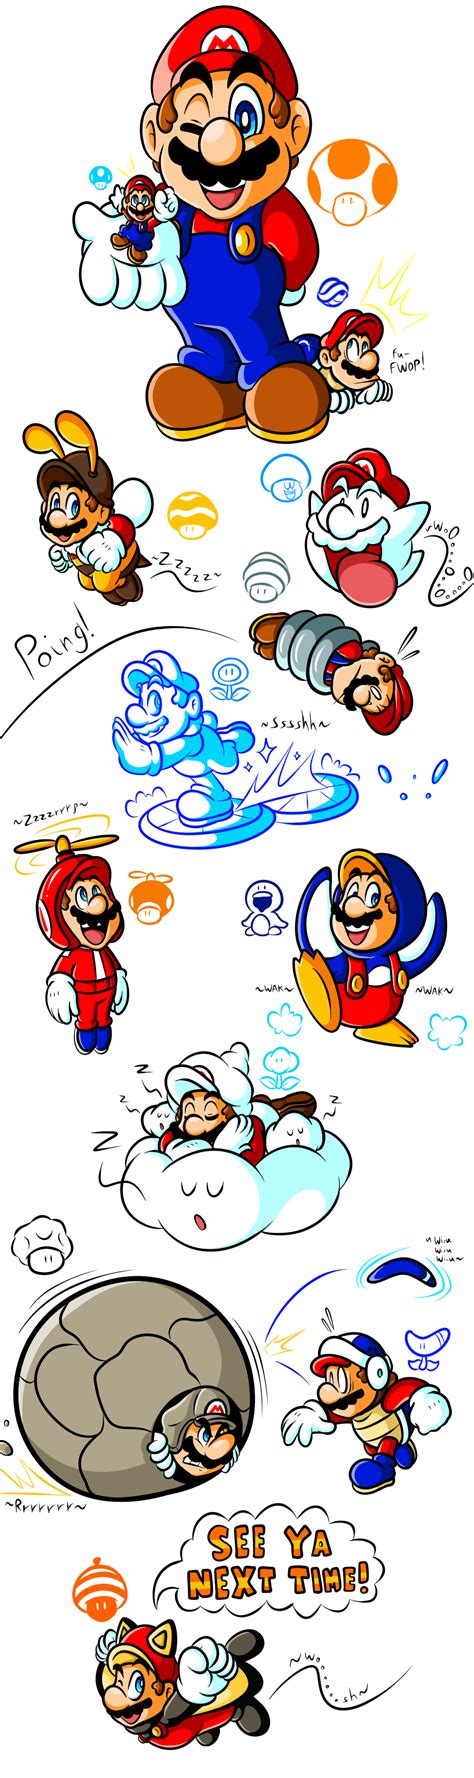 Marios Gallery Of Power Ups 2006 2012 By Jamesmantheregenold On